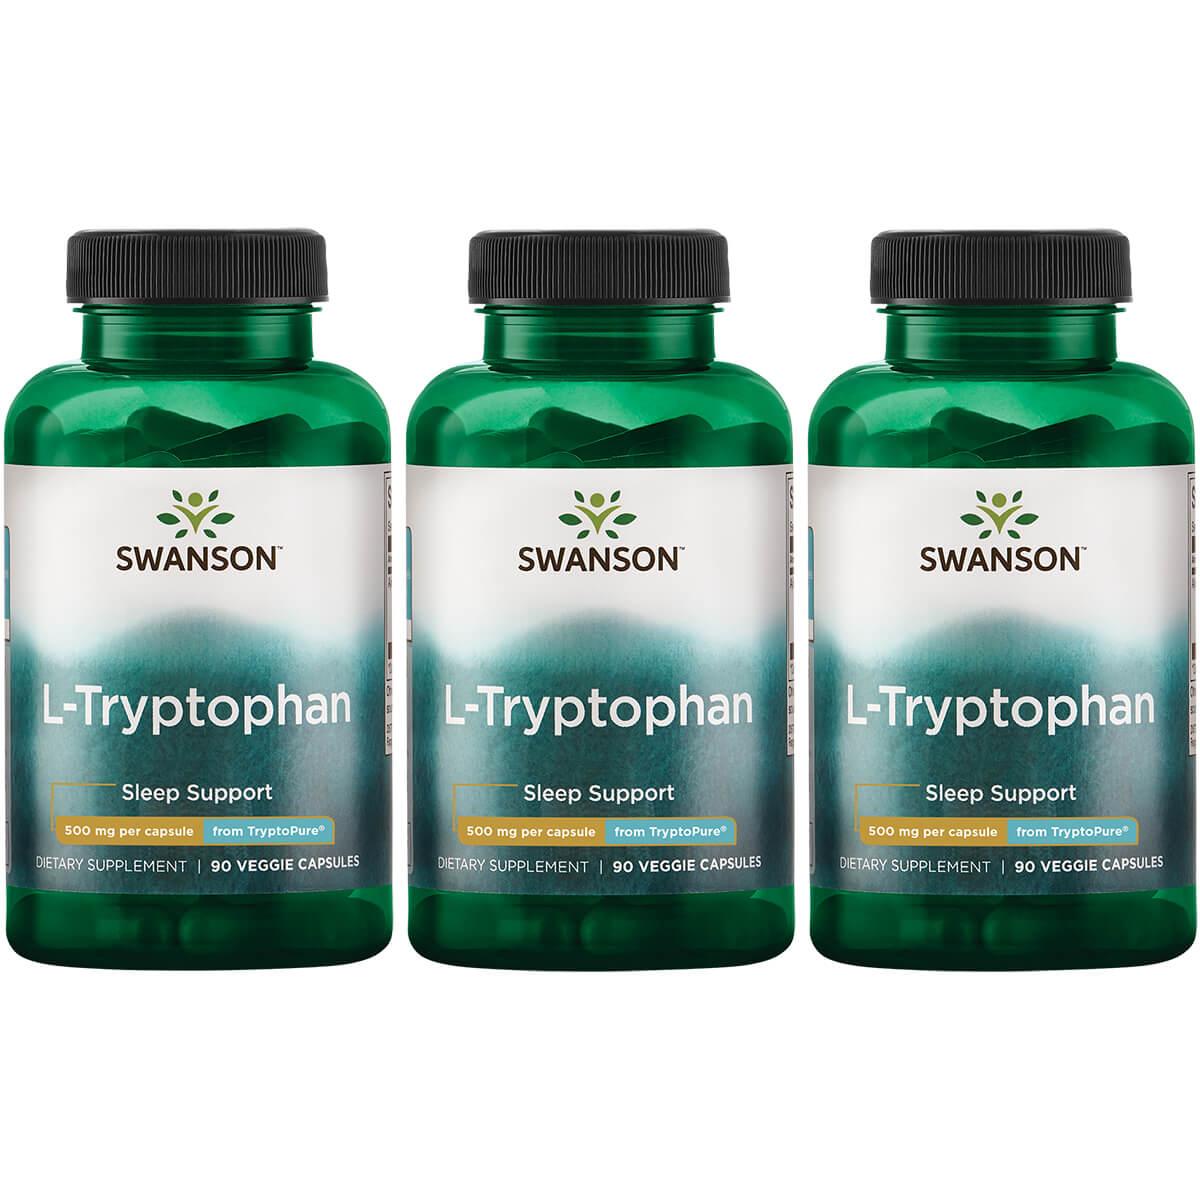 Swanson Ultra L-Tryptophan from Tryptopure 3 Pack Supplement Vitamin 500 mg 90 Veg Caps